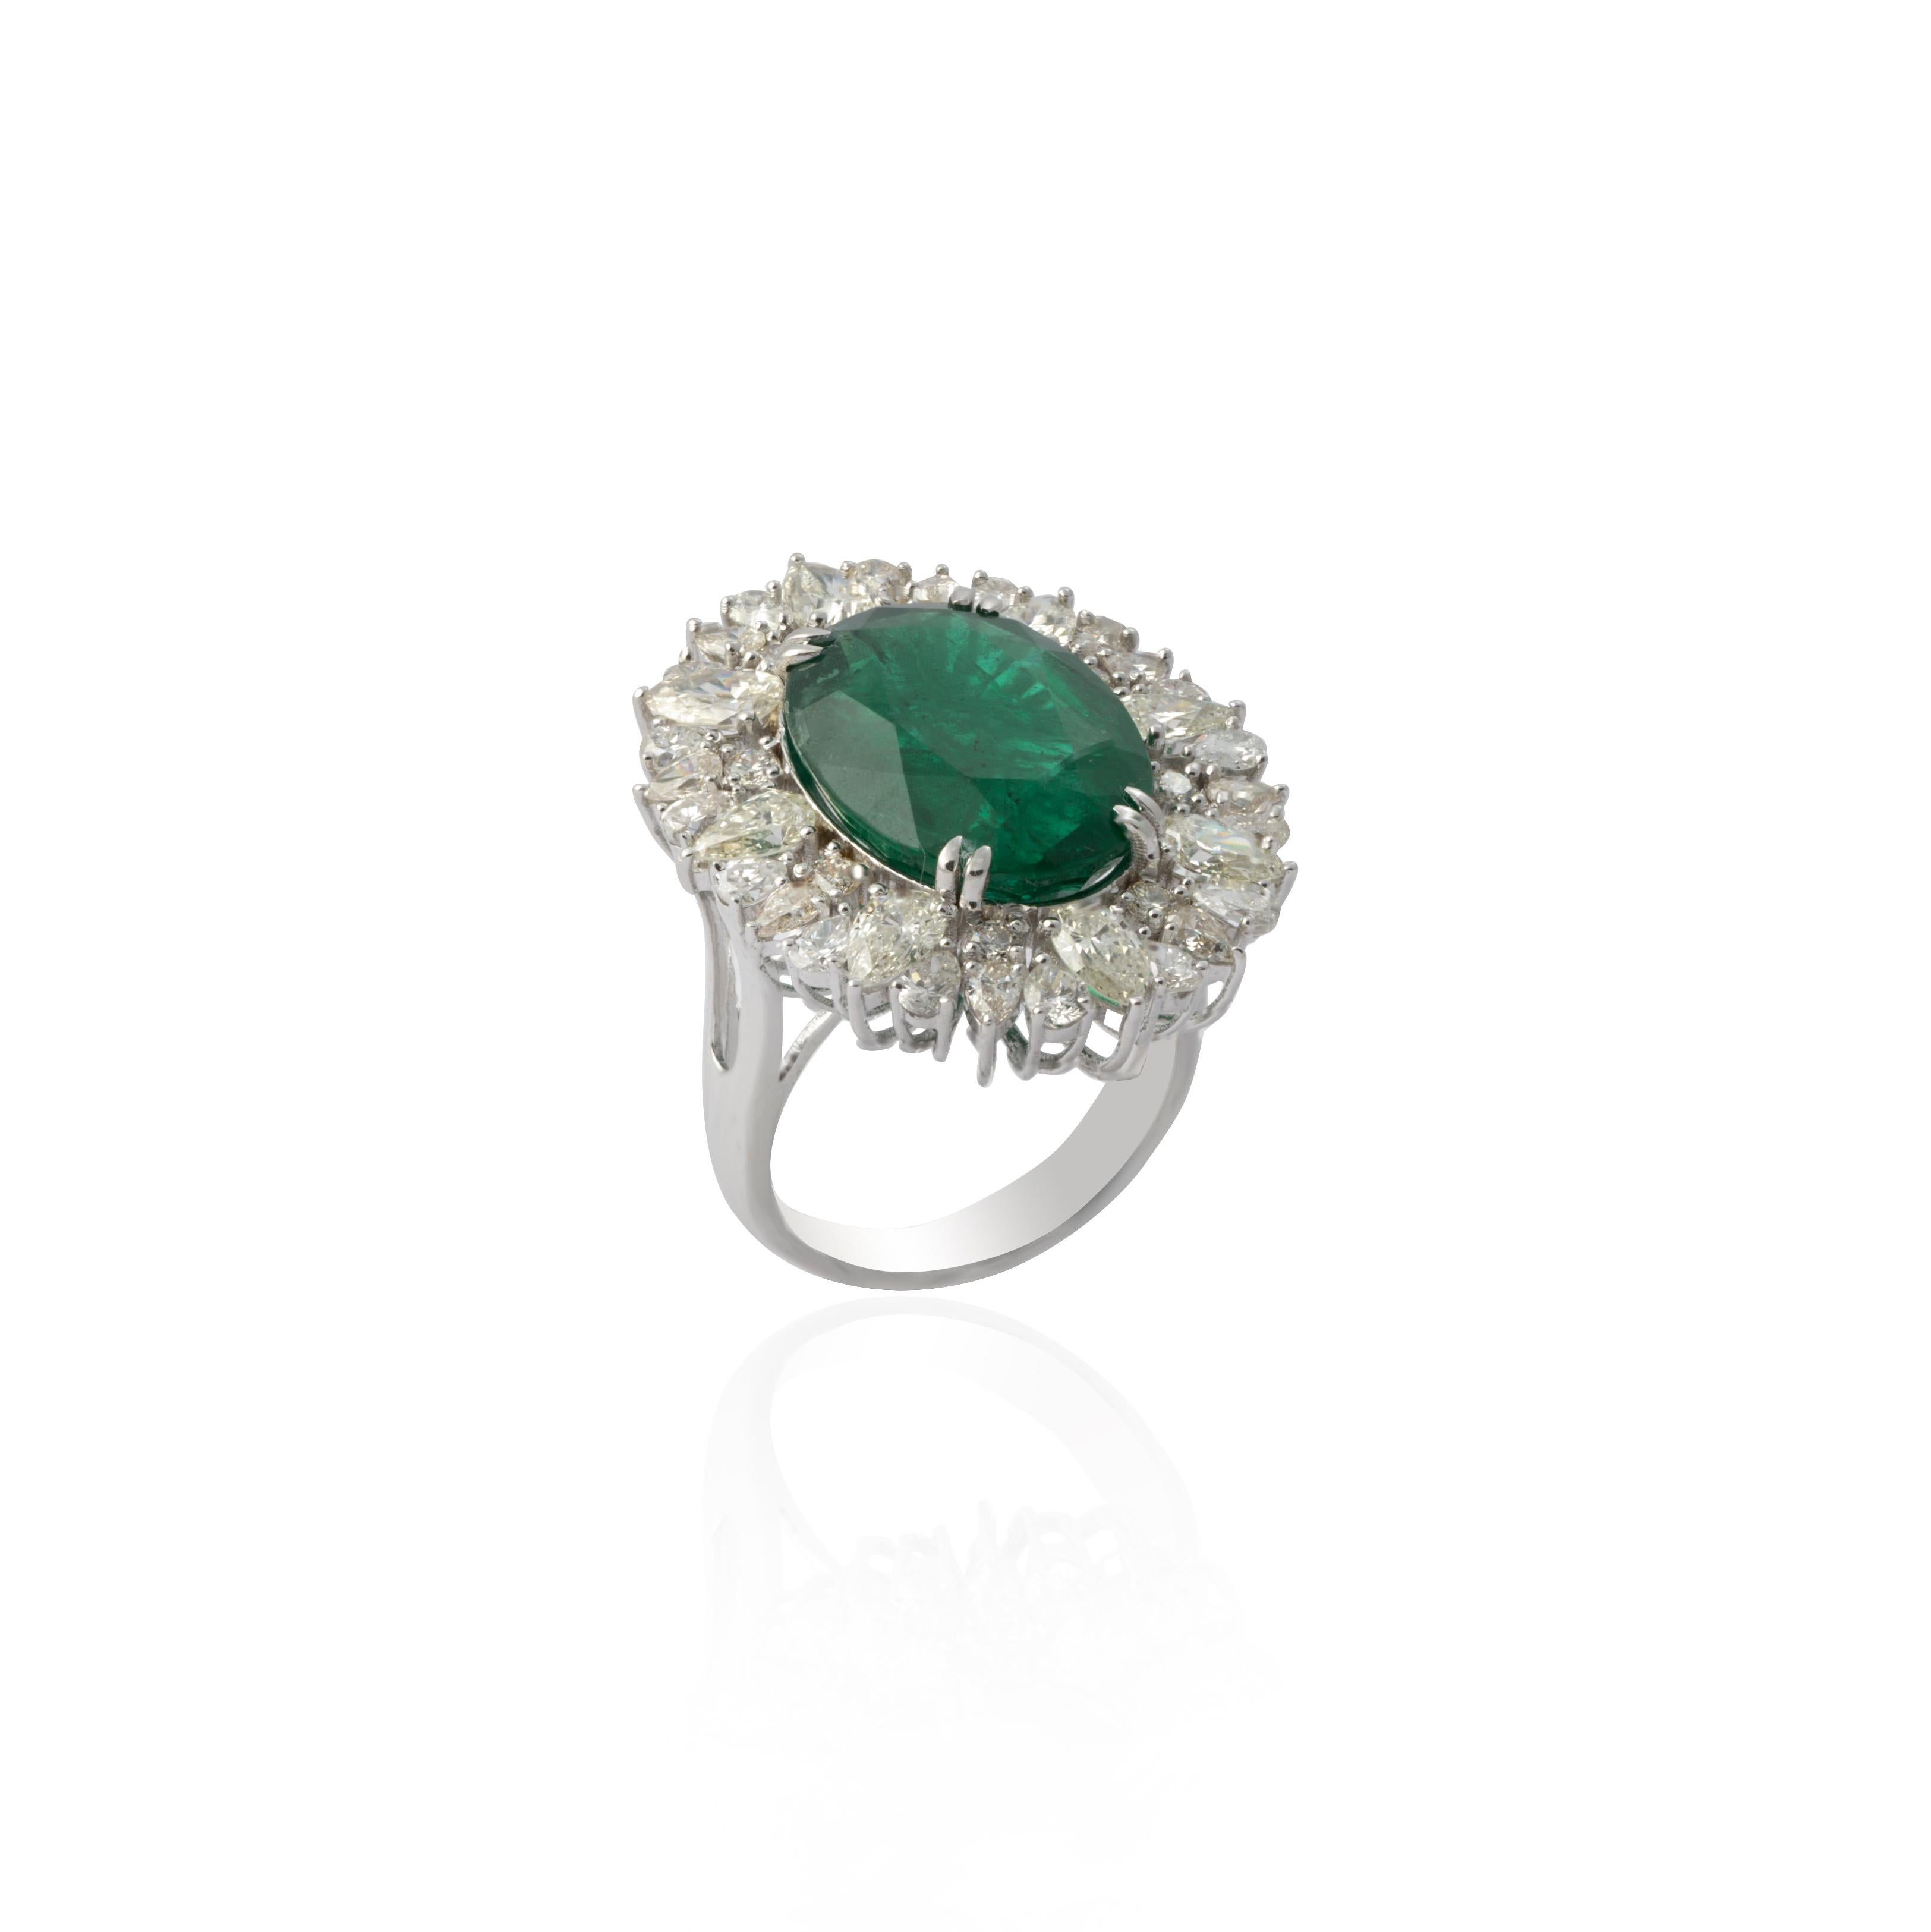 This is a stunning natural Zambian Emerald cocktail ring with big size diamonds in 14k gold

the Emerald is of very good quality and diamonds are big sizes with vsi purity and G colour

Emerald : 9.67 cts
diamonds:  3.37 cts
gold : 6.39 gms

Its